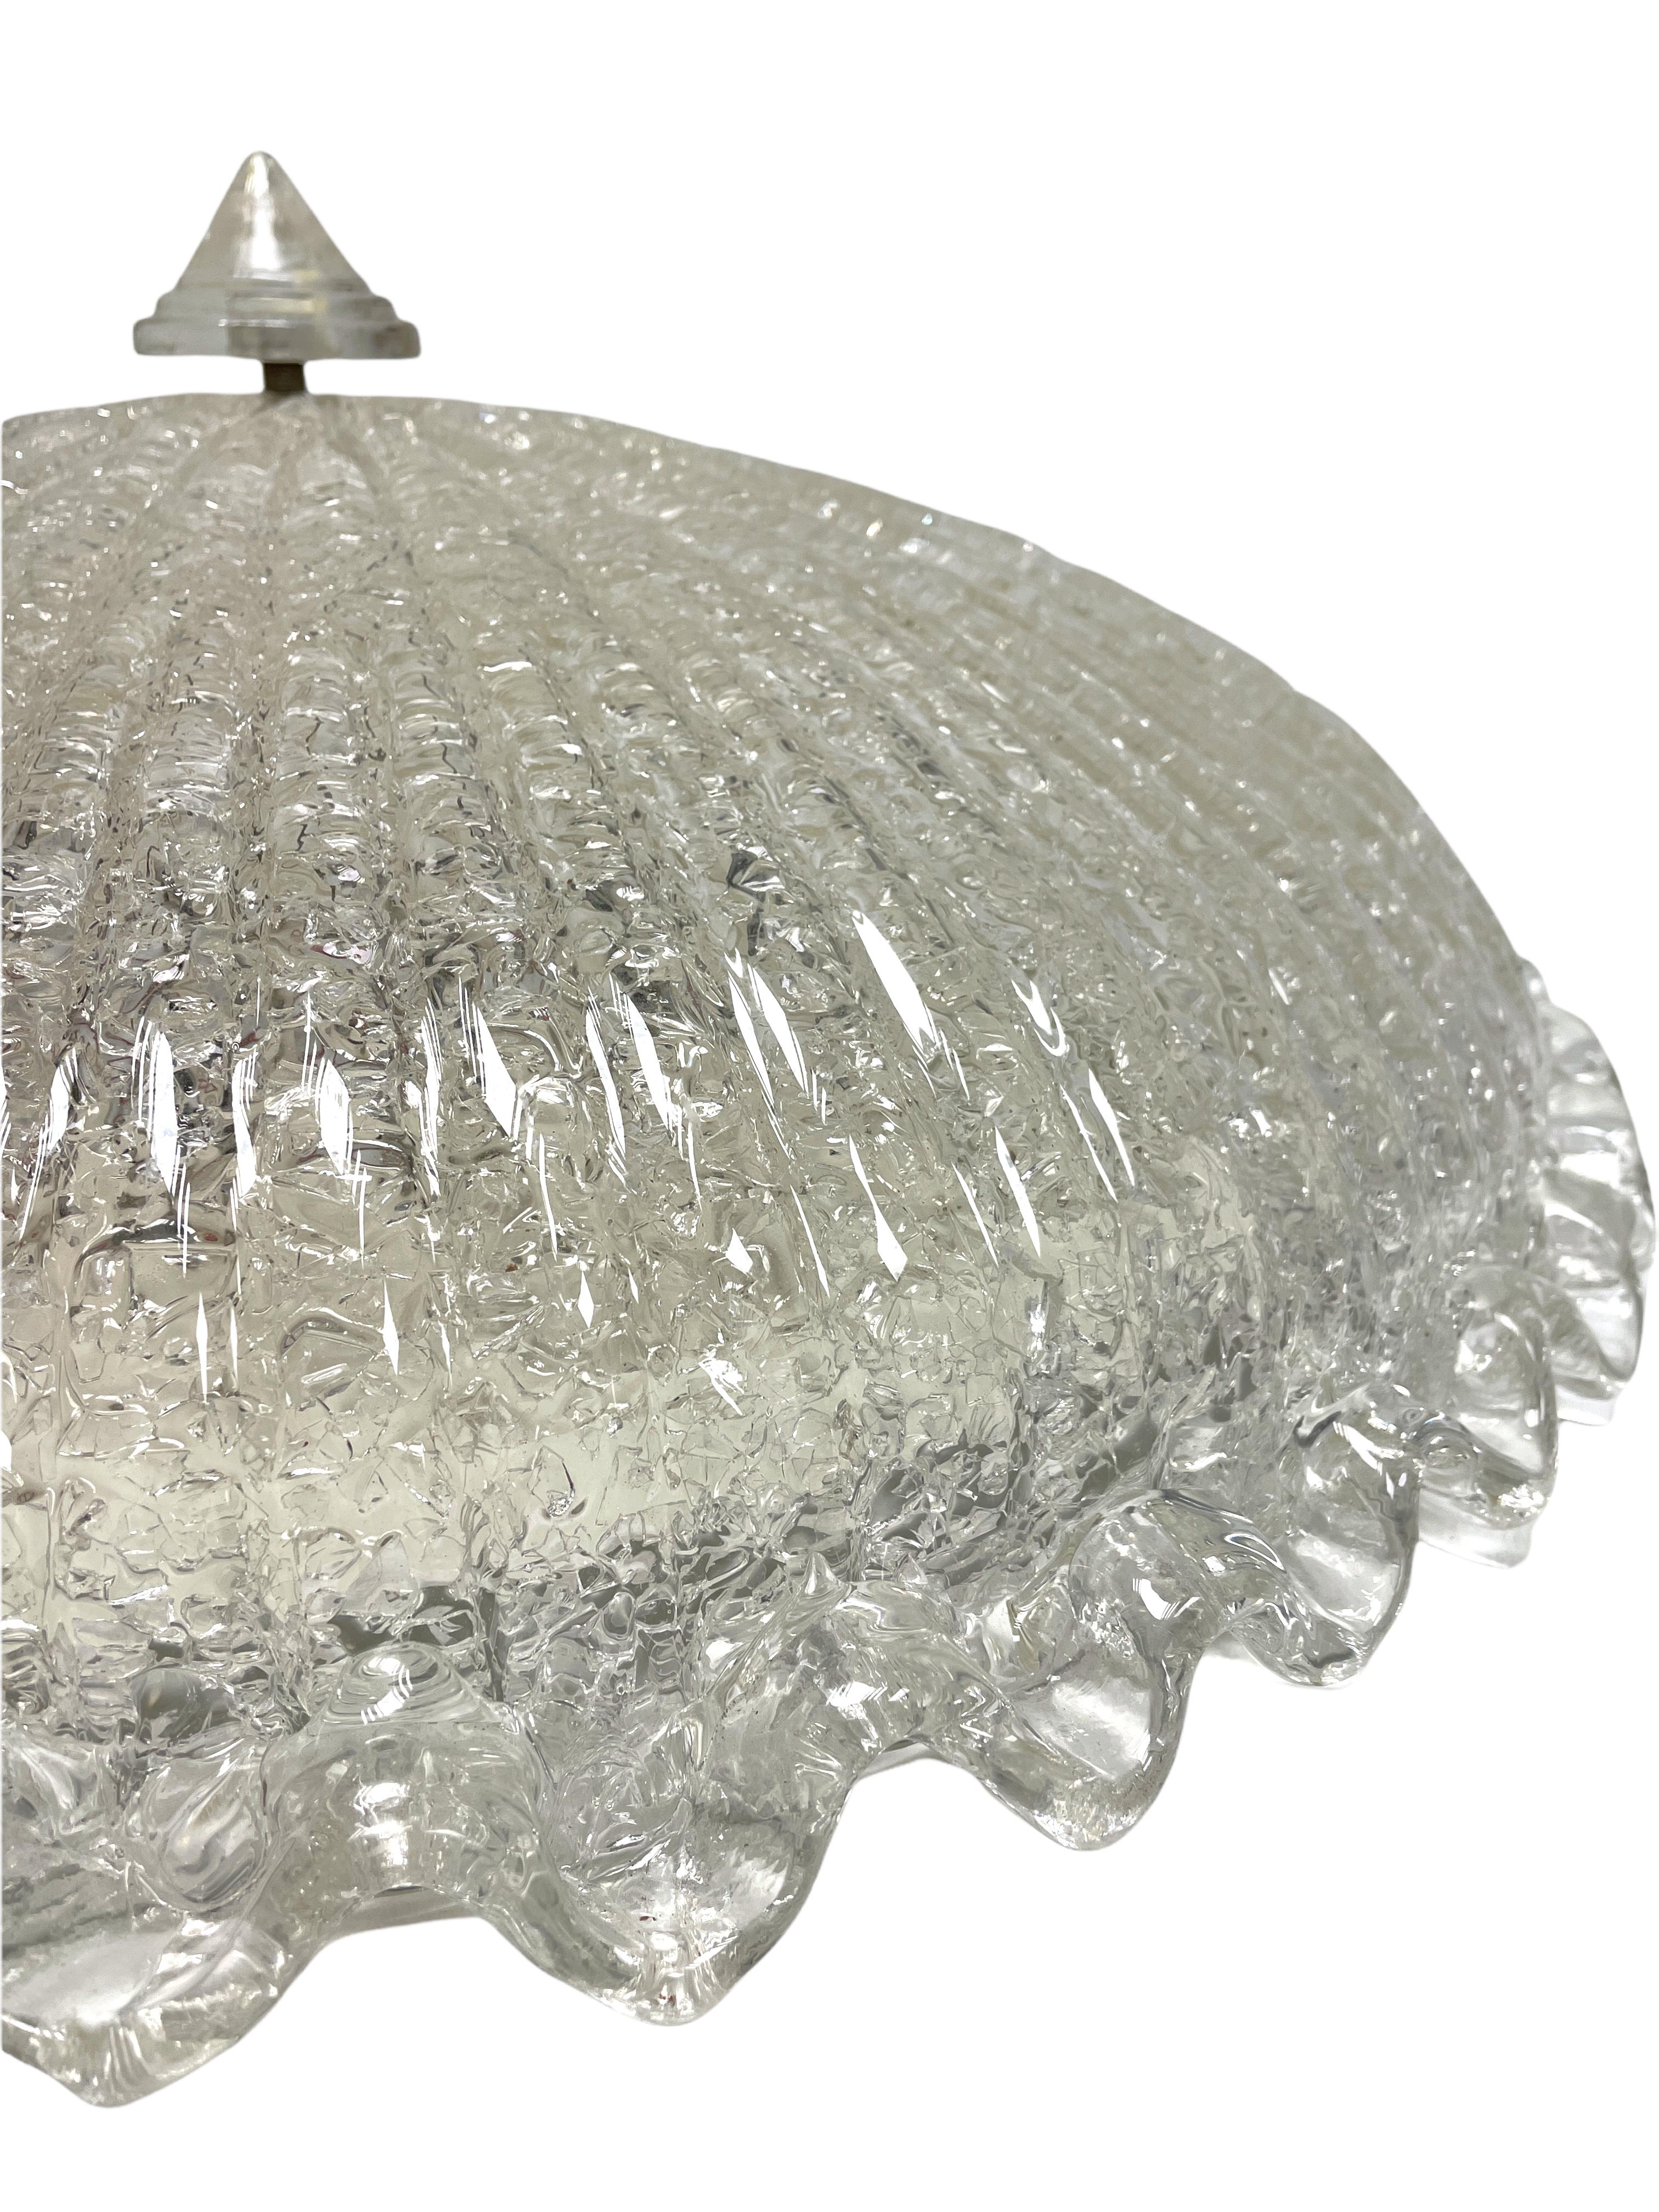 Monumental Large Clear Murano Glass Flush Mount Venini Style 1970s, Italy 1